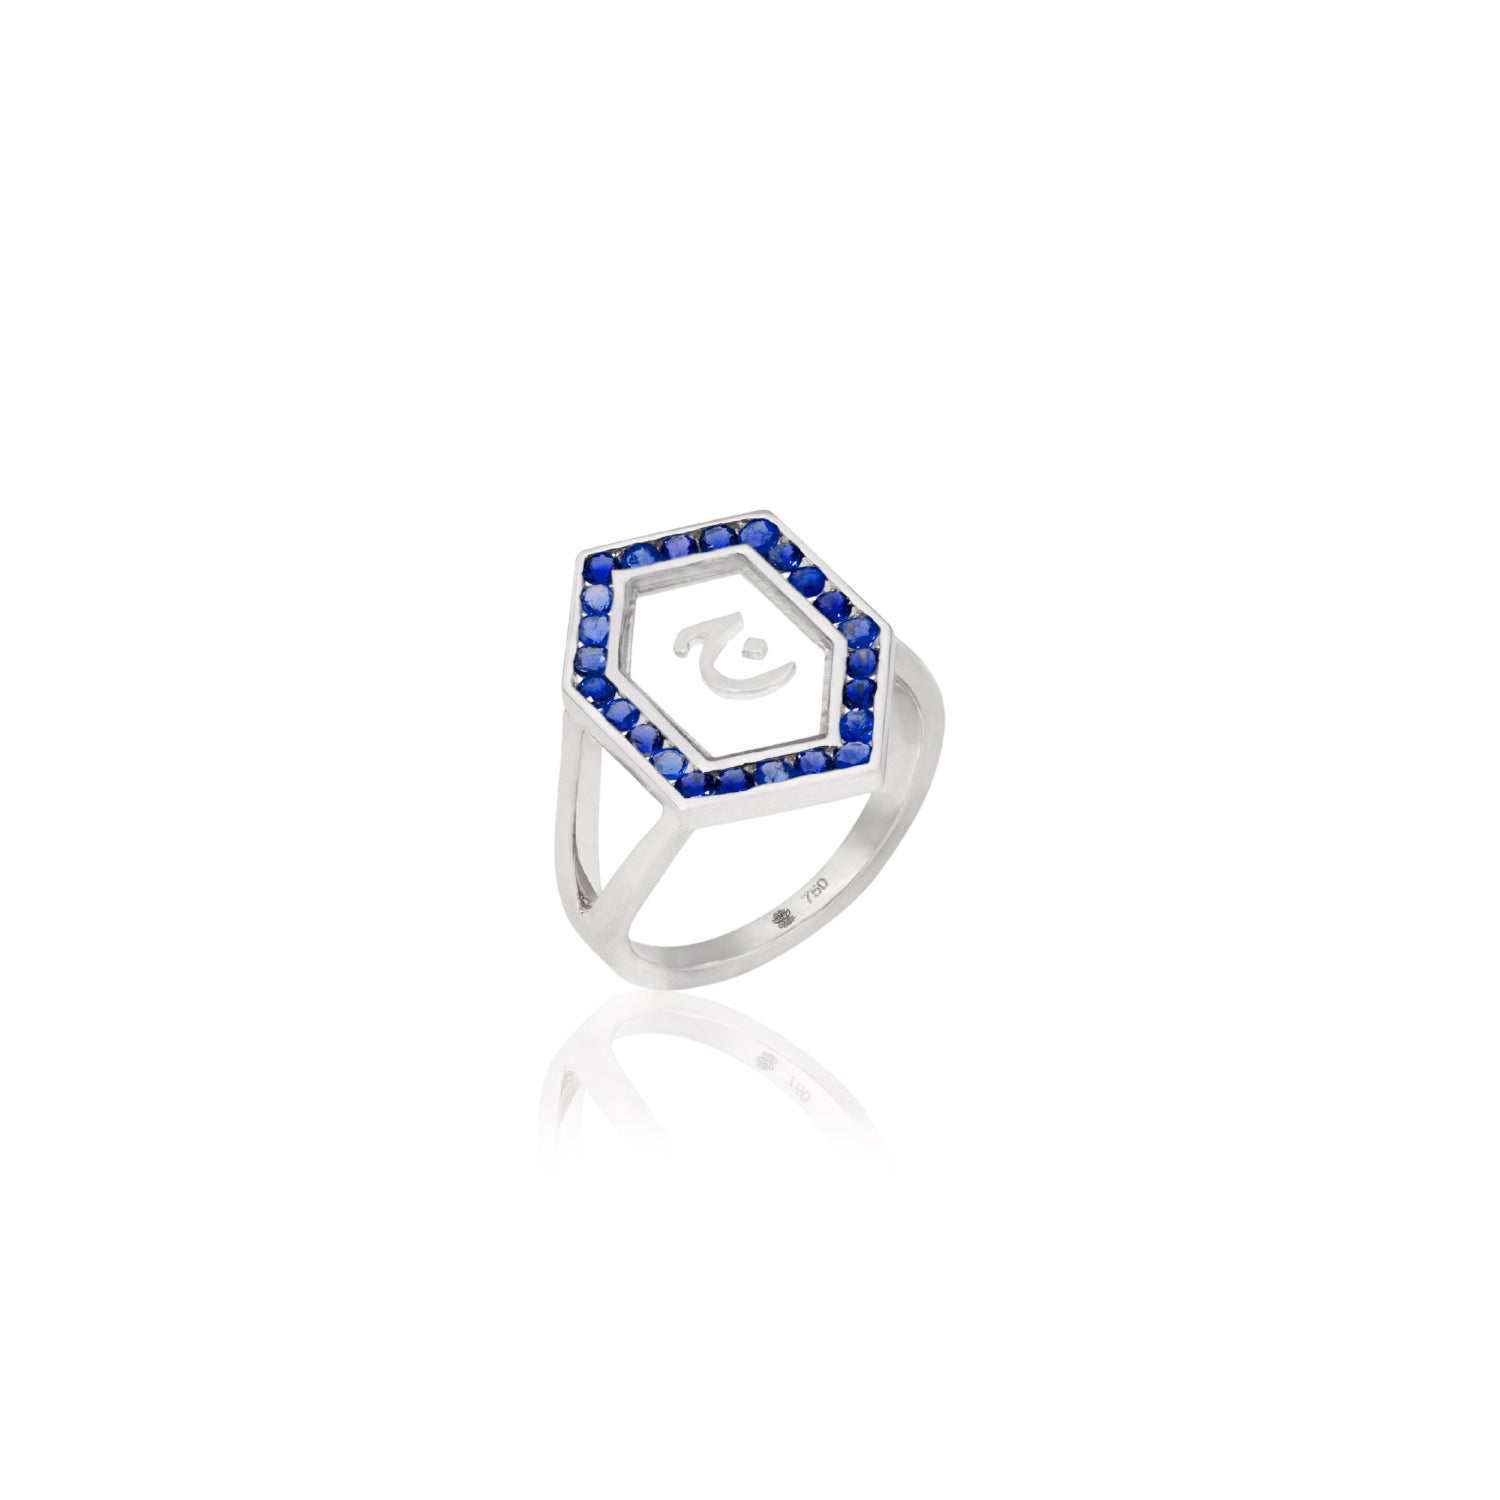 Qamoos 1.0 Letter ج Sapphire Ring in White Gold